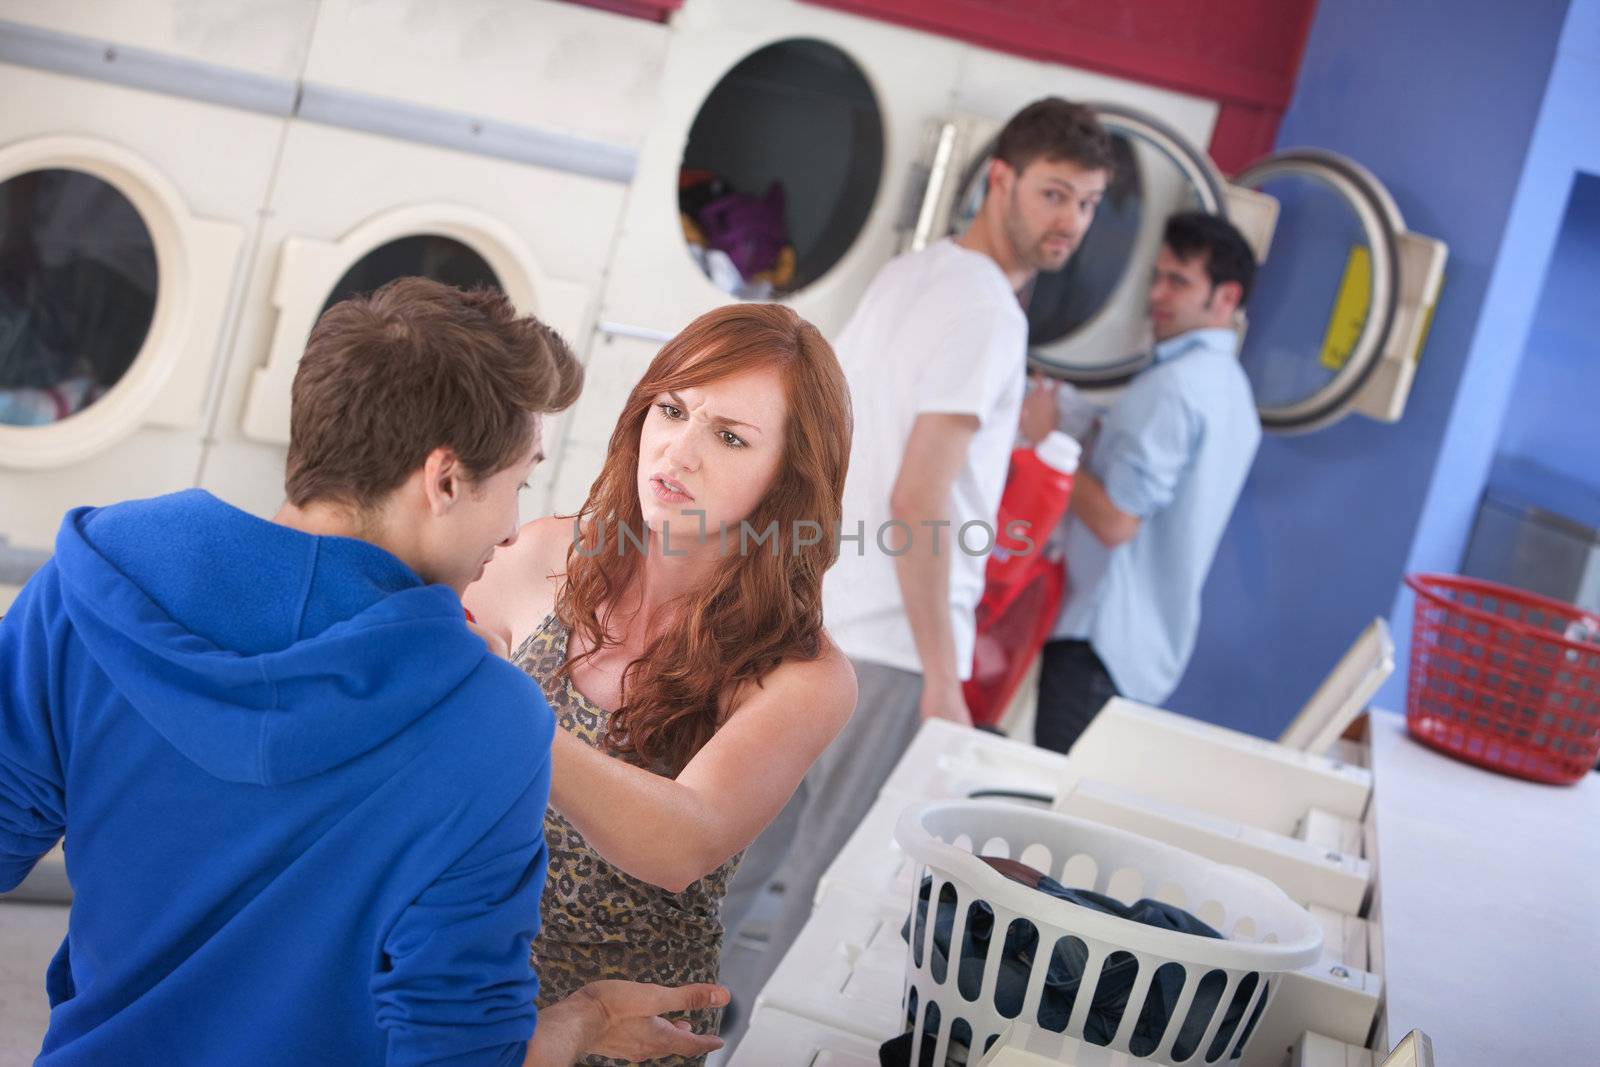 Couple Arguing In Laundromat by Creatista